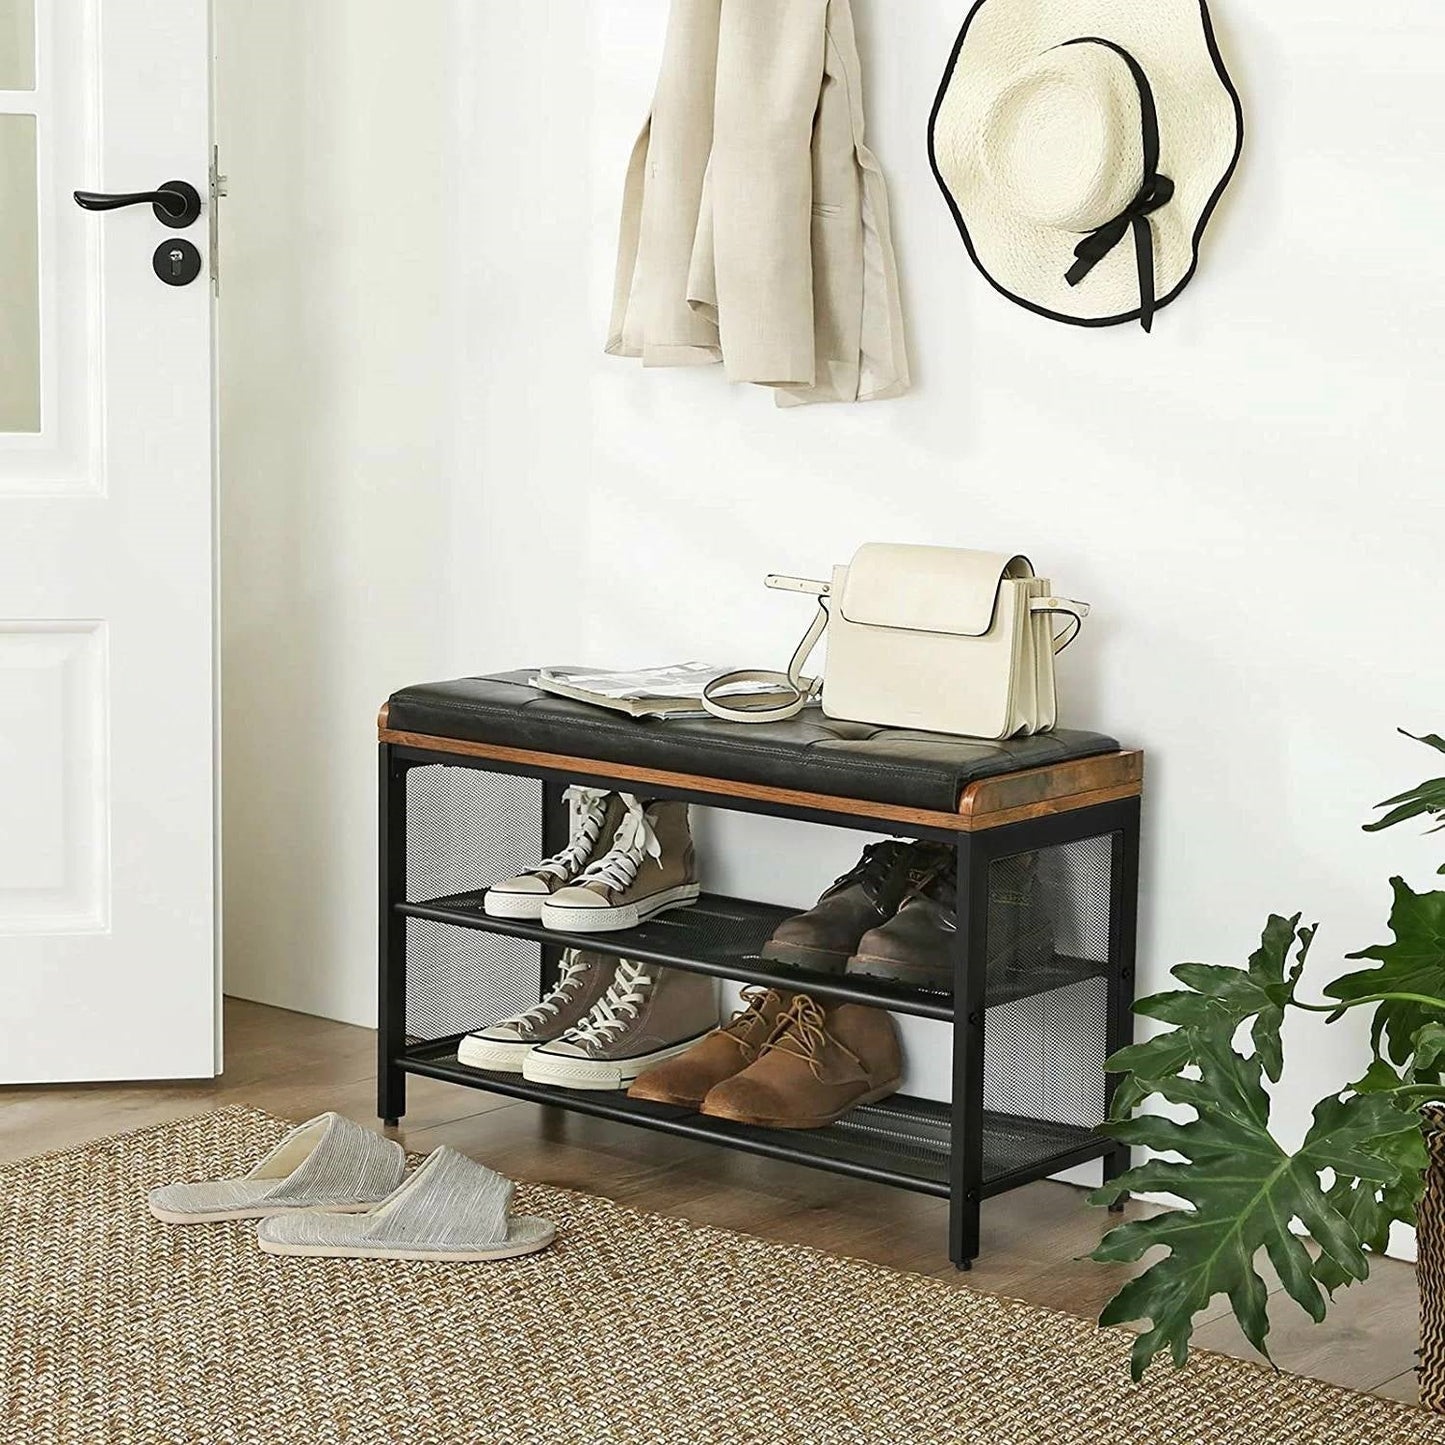 Black Metal Entryway Shoe Rack Storage Bench with Padded Seat Cushion